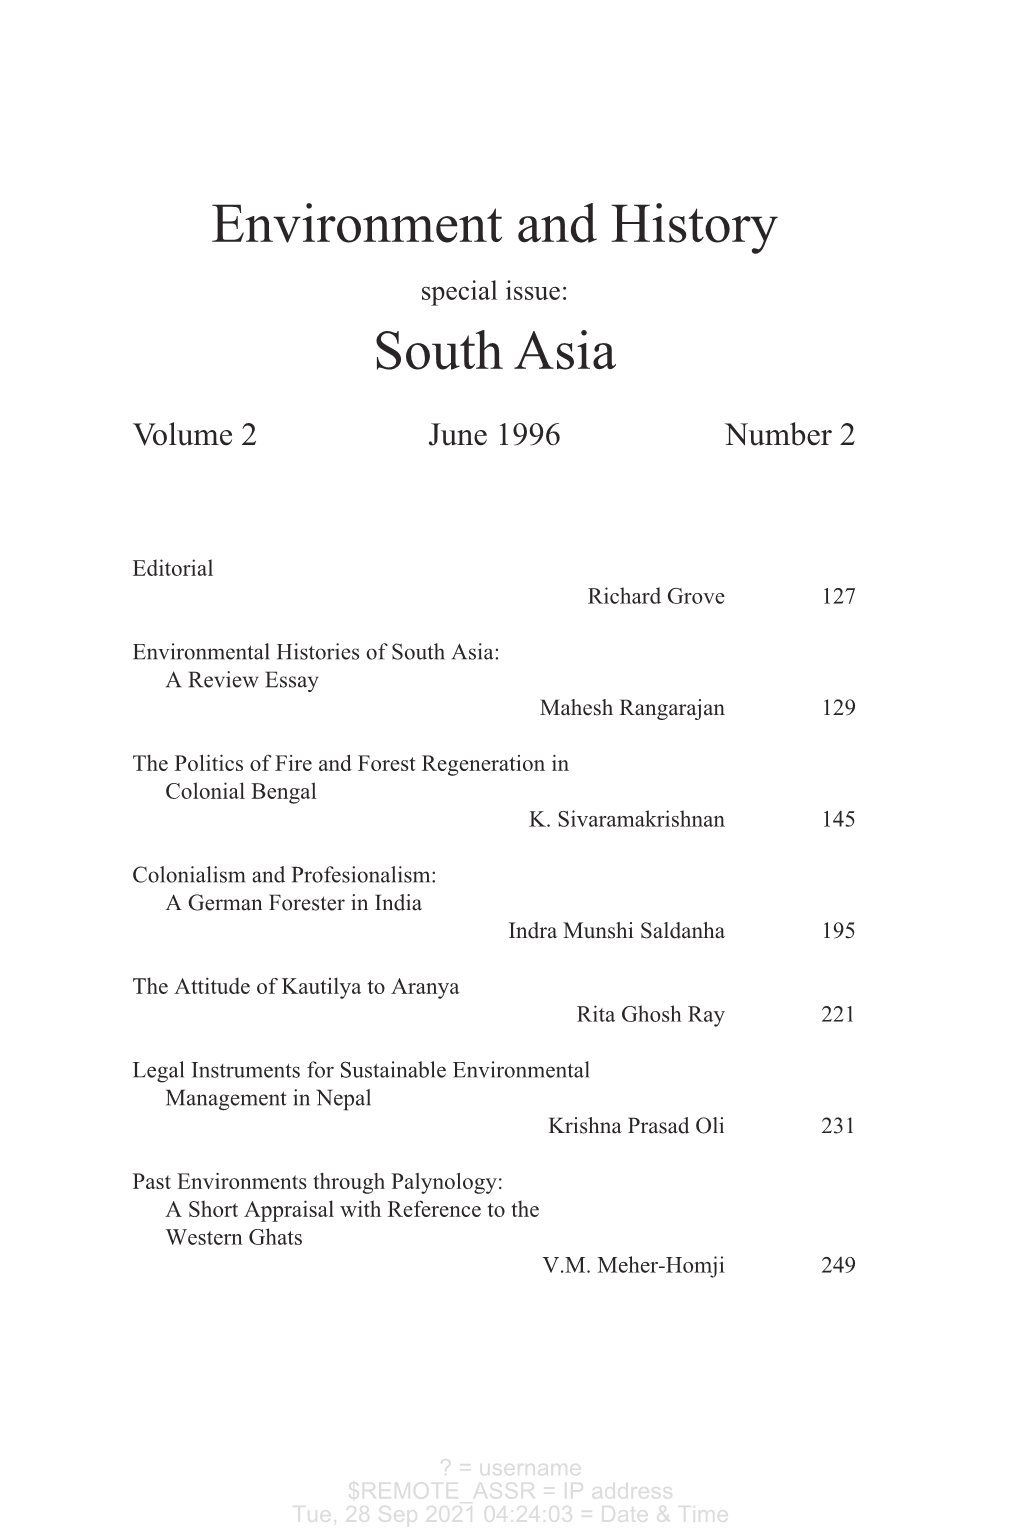 Environment and History South Asia